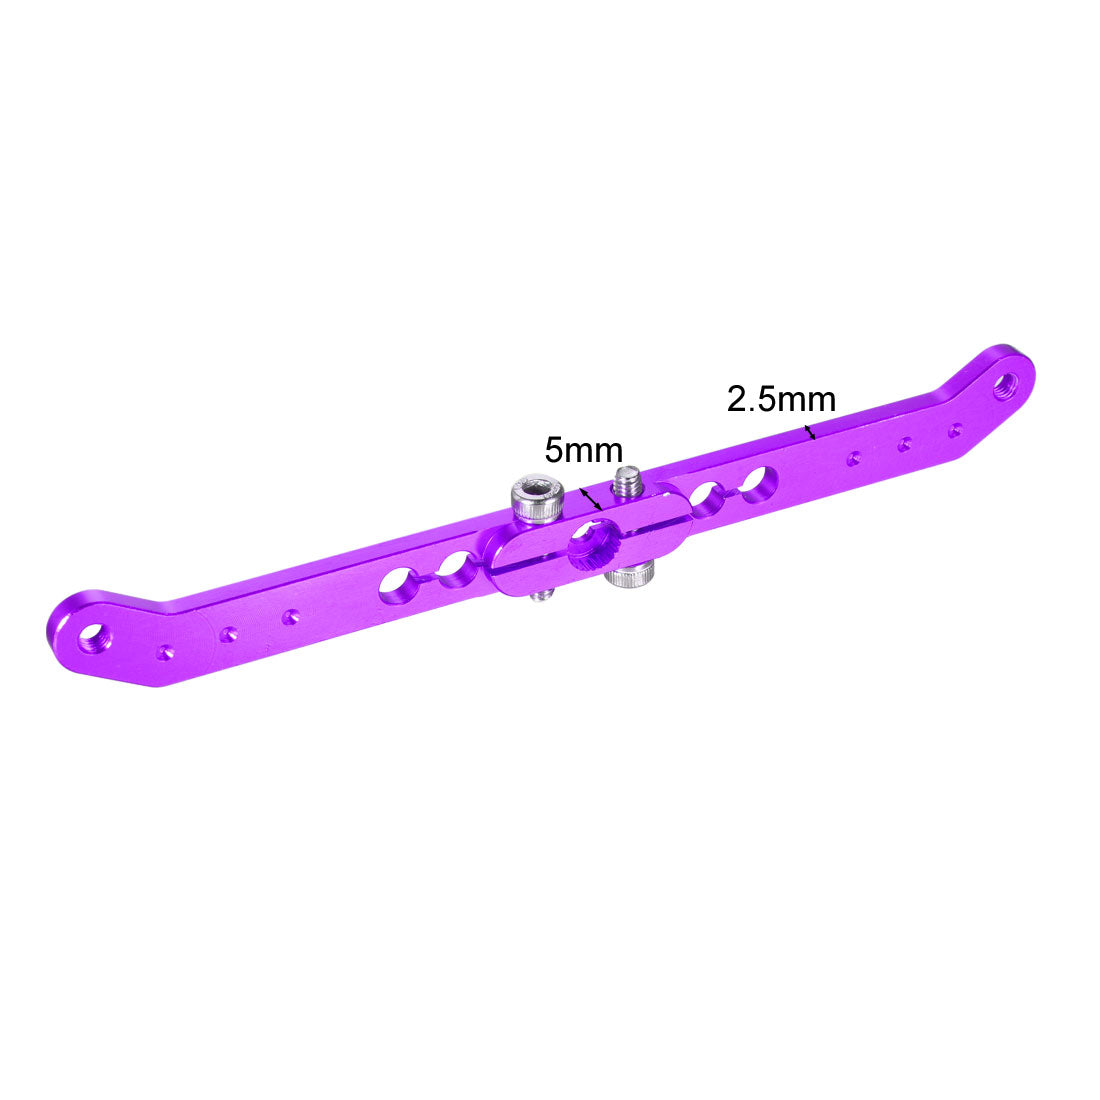 uxcell Uxcell Aluminum Servo Arms Double Arm 25T M3 Thread Purple, for 4 Inch Futaba